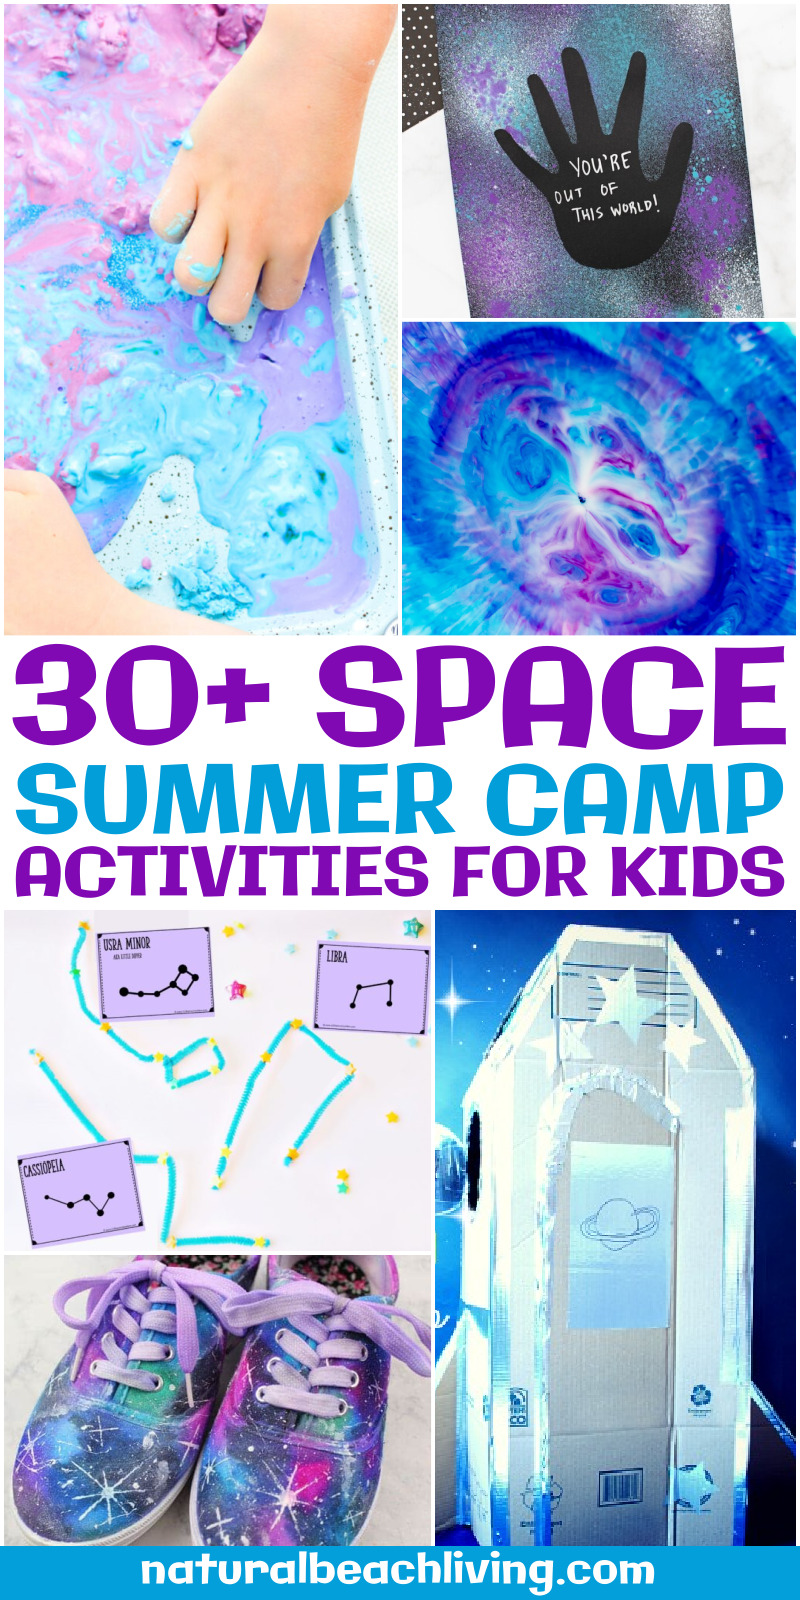 Kids will love these Space Summer Camp Theme Activities that are fun and educational activities. From learning about the phases of the moon to making galaxy Oobleck, space slime, homemade galaxy playdough, space crafts, and more. Plus, they'll have tons of fun with their friends while they learn with a space theme!